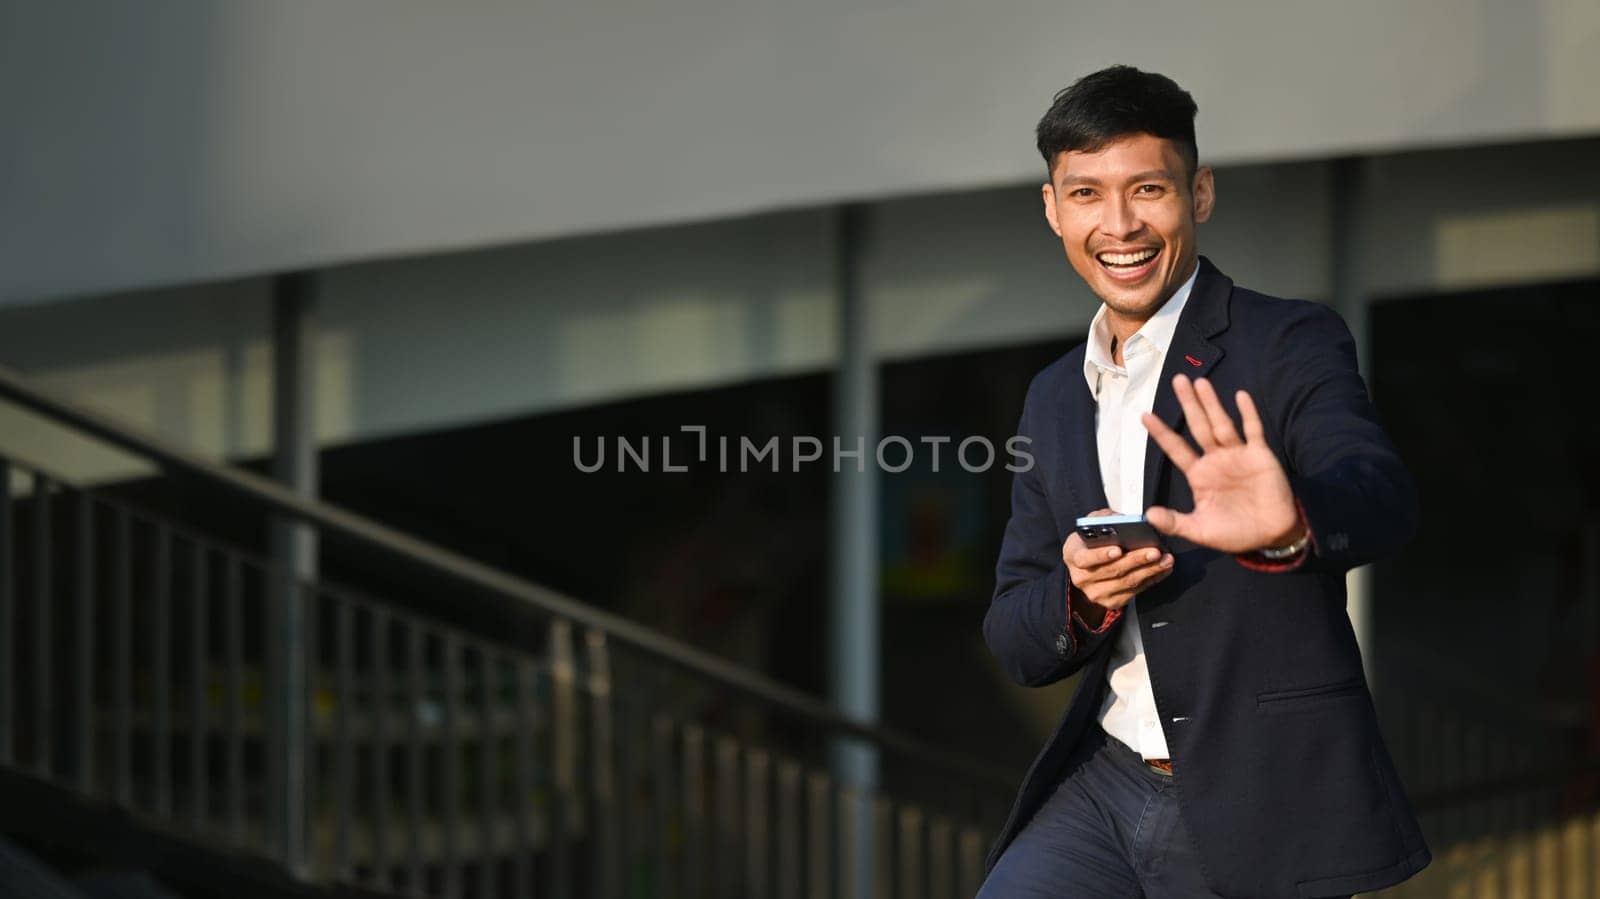 Shot of businessman using smartphone while walking in business district. Modern lifestyle, technology and business concept.